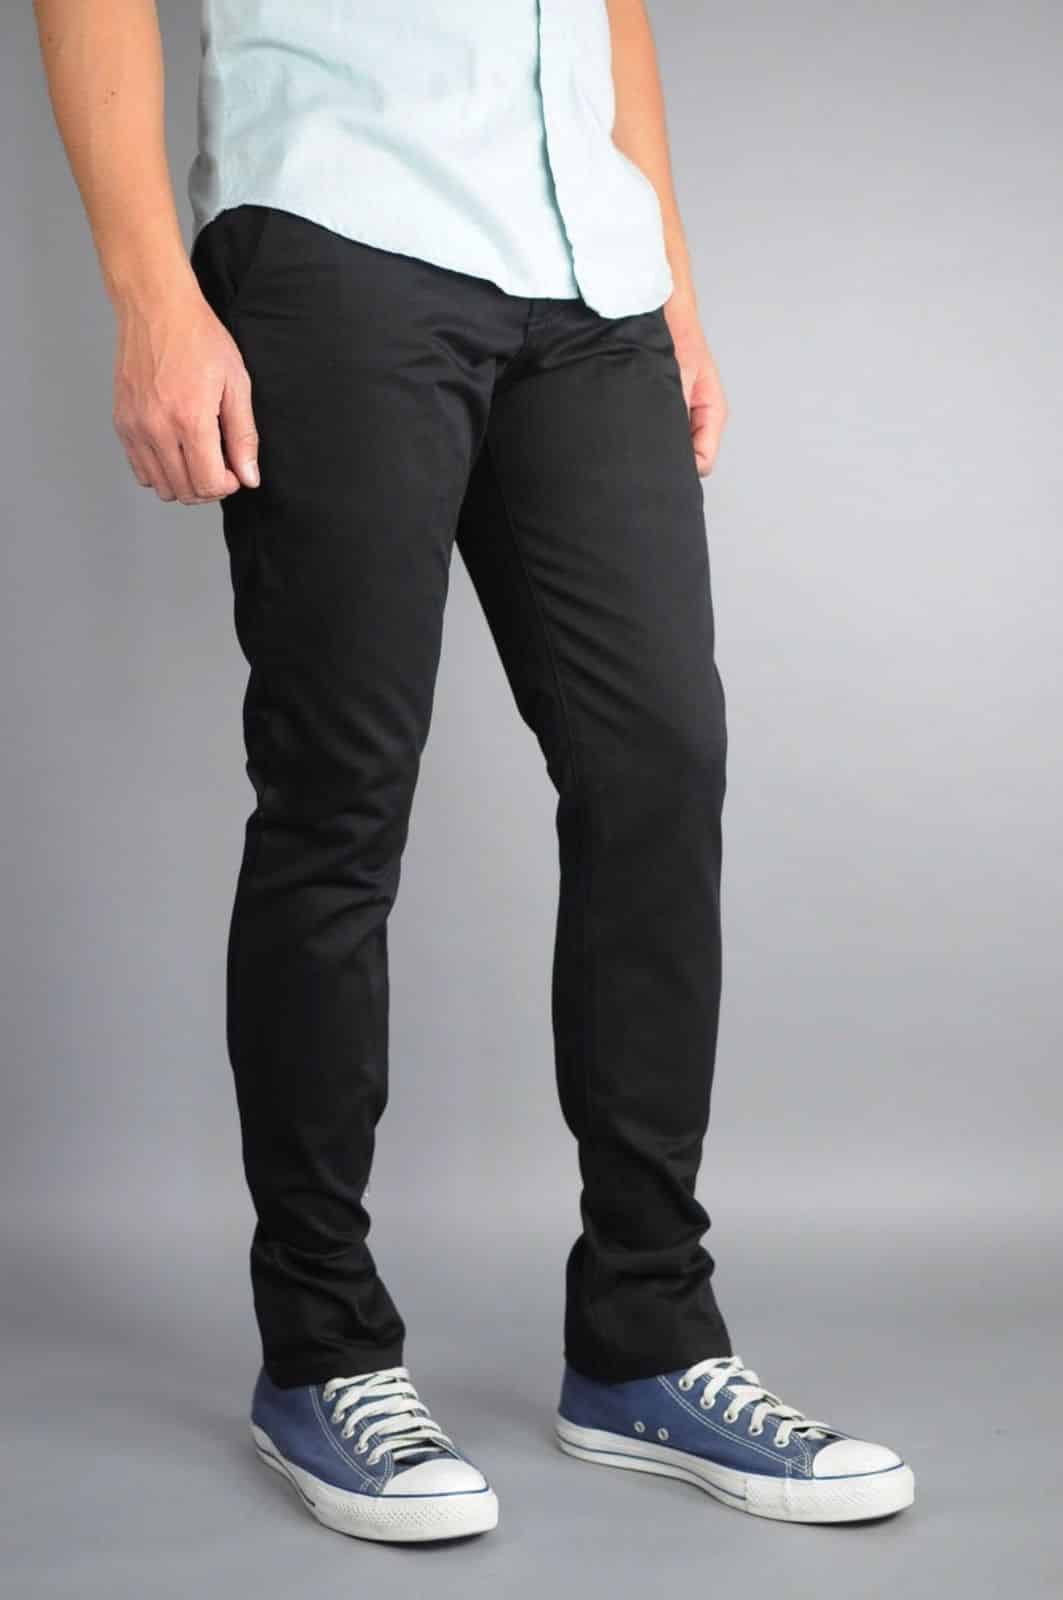 Black Chino Pants by Neo Blue